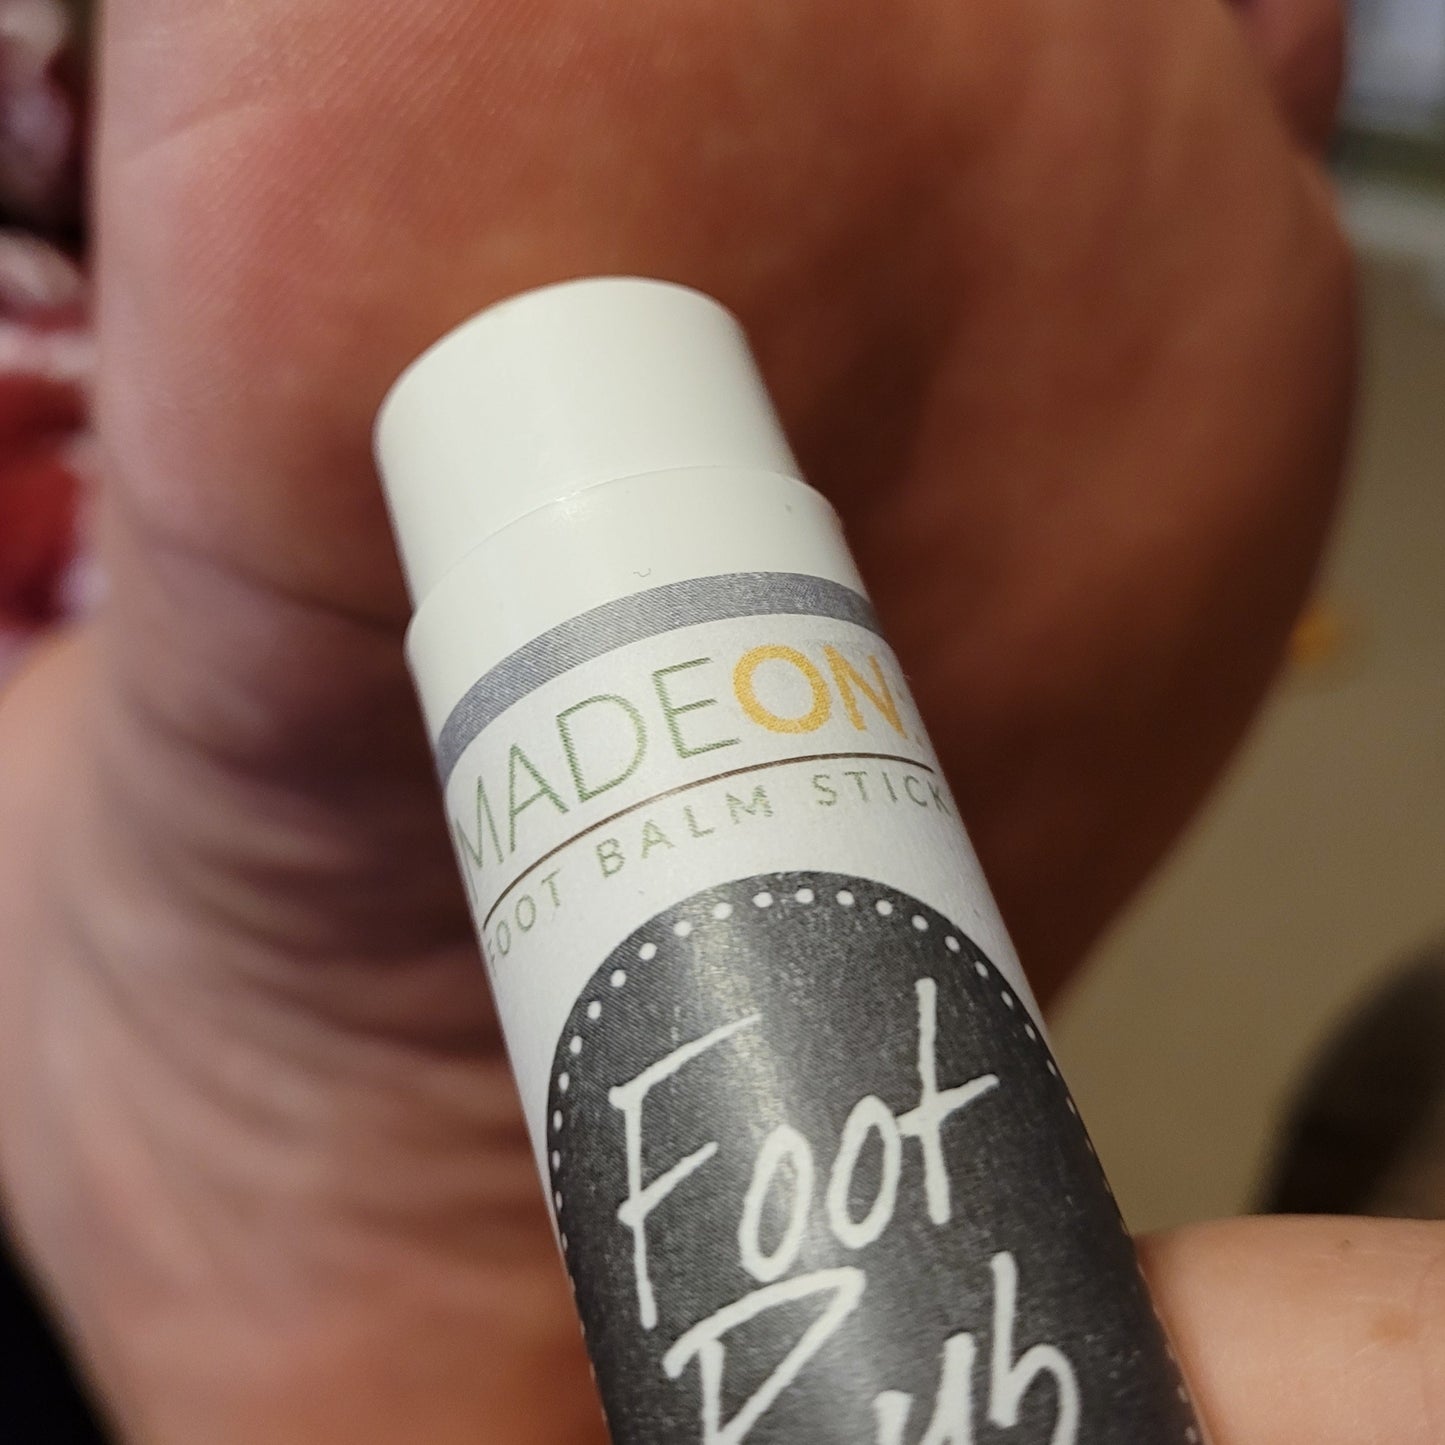 foot rub lotion stick applied to bottom of feet